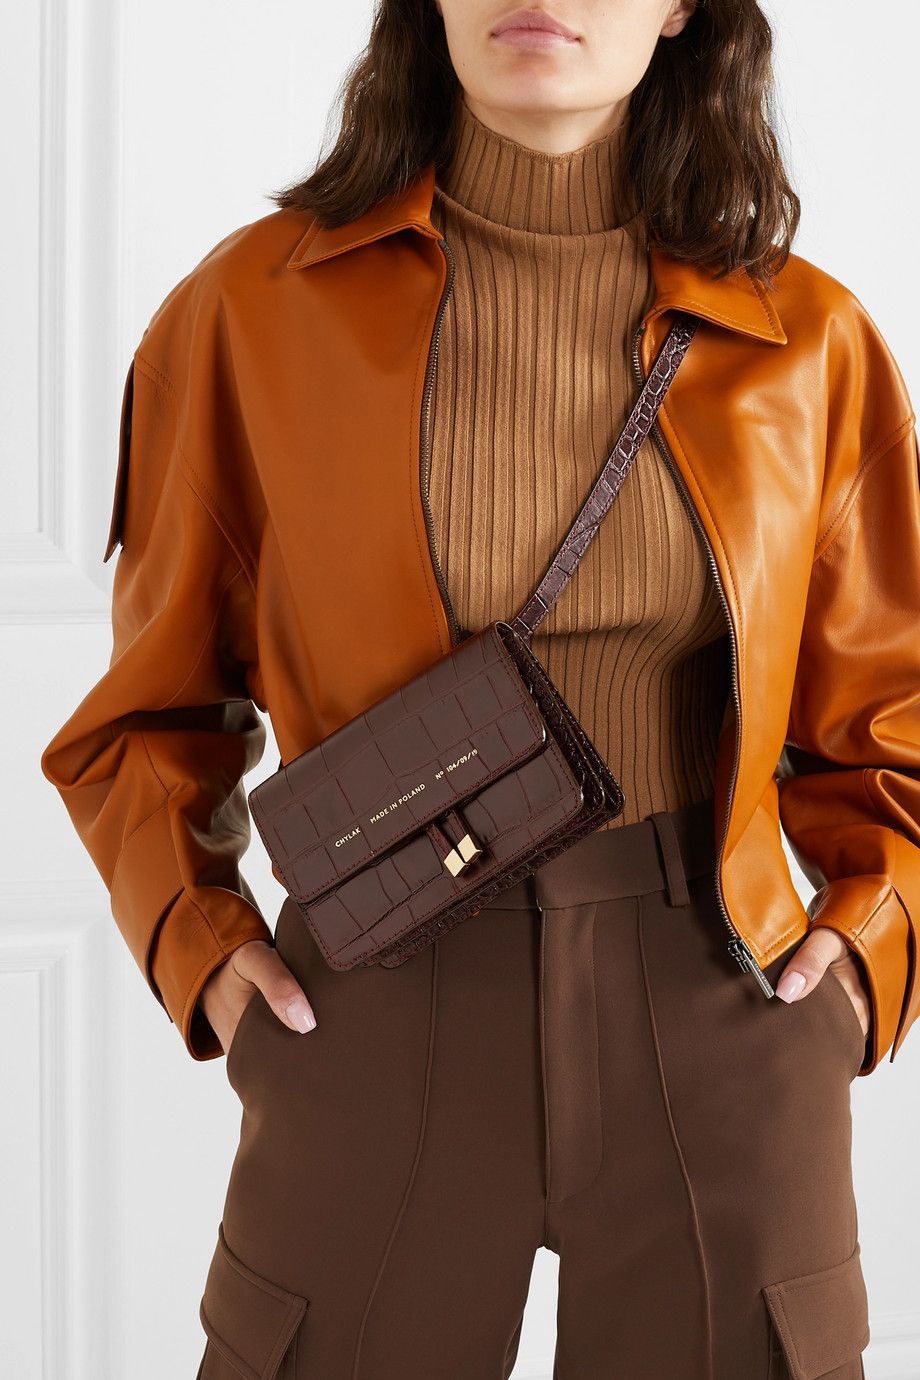 2020's Favorite Accessory: Belt Bags and Fanny Packs - Coffee and